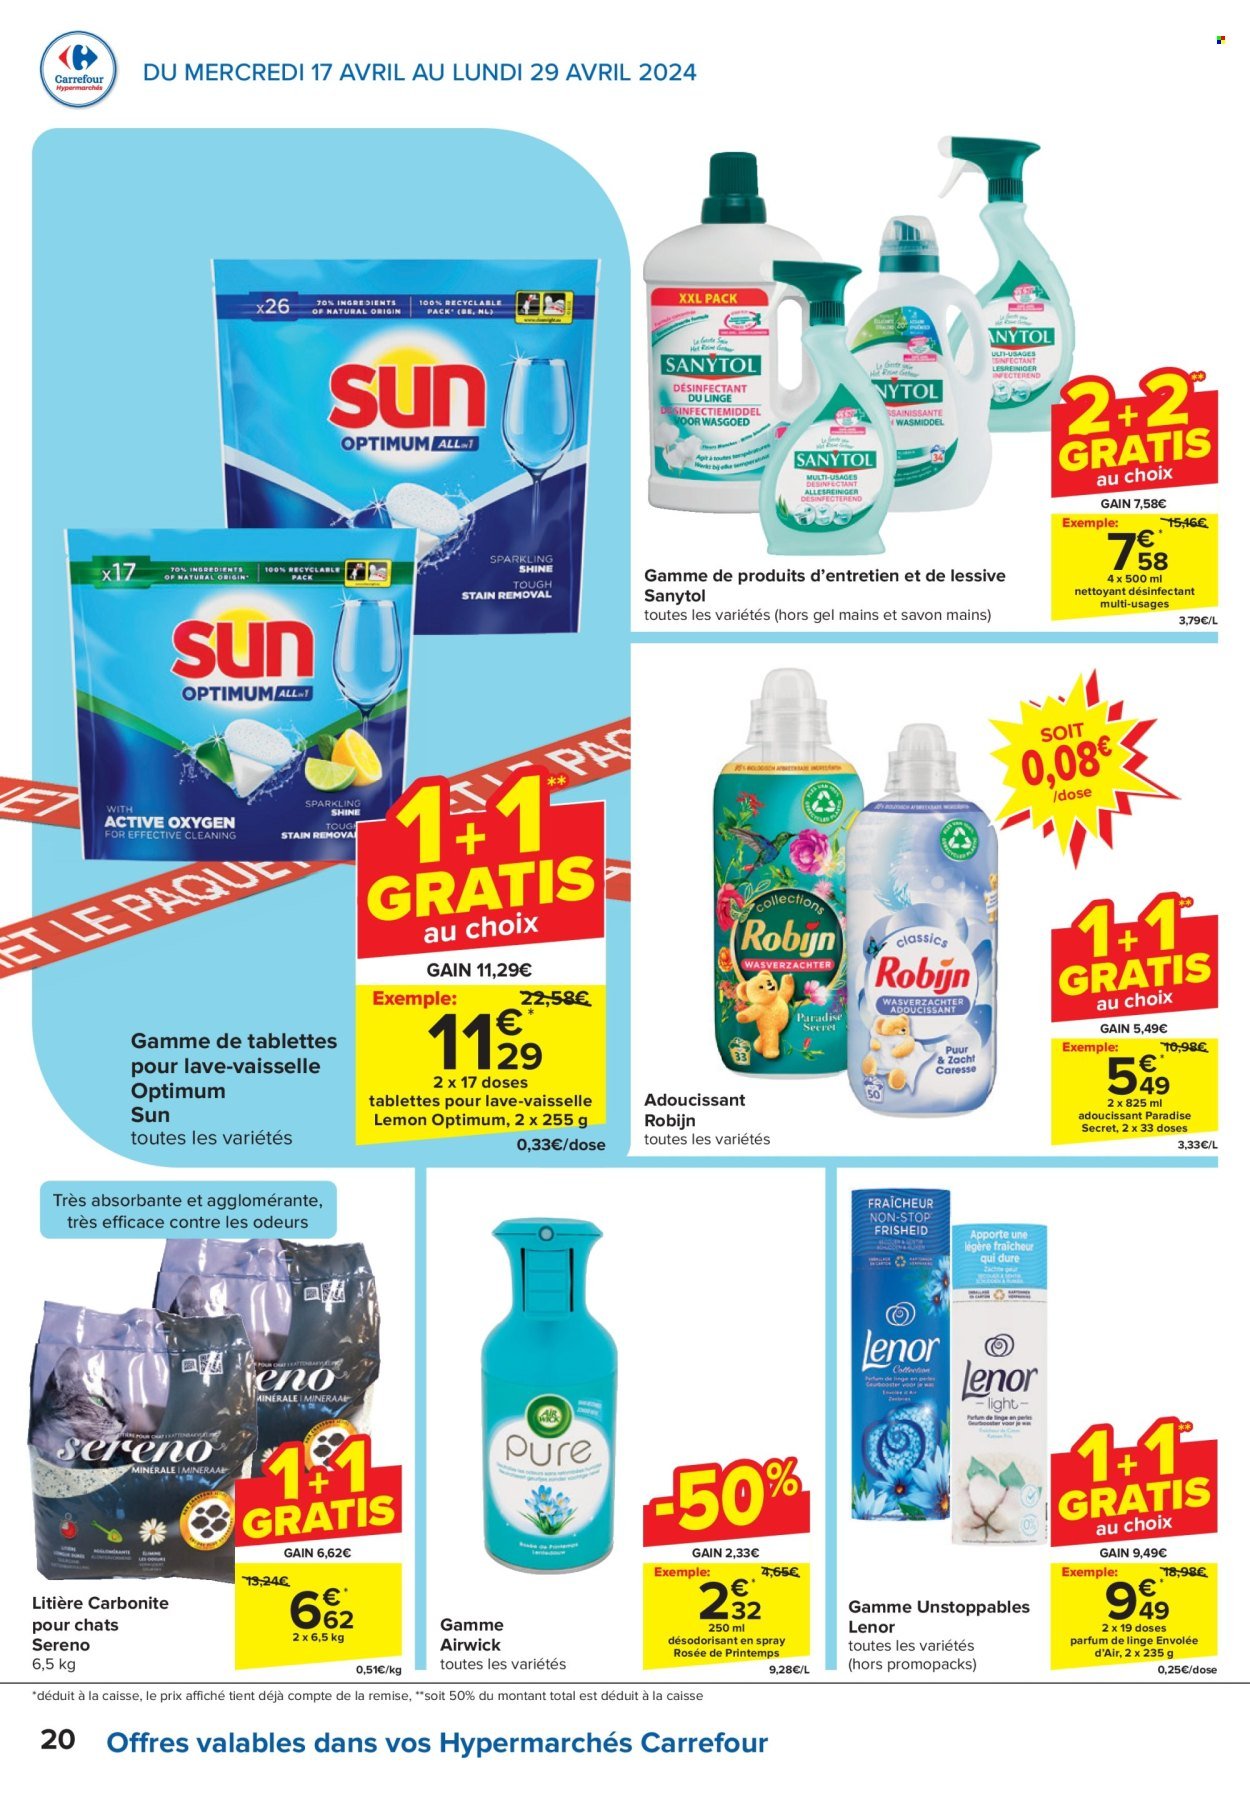 Catalogue Carrefour hypermarkt - 17.4.2024 - 29.4.2024. Page 20.